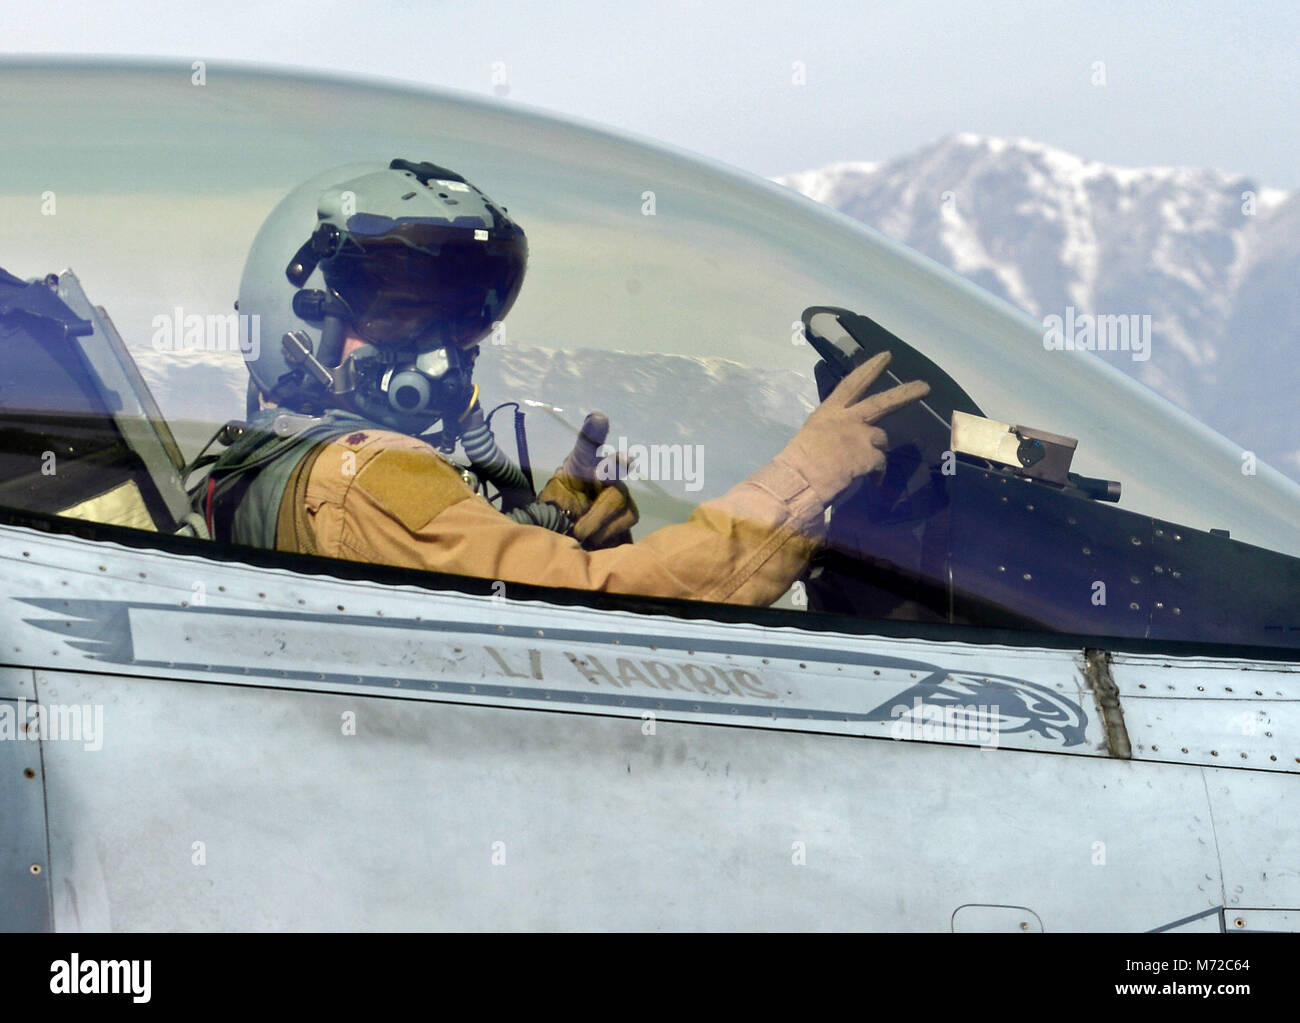 “Mach”, 77th Expeditionary Fighter Squadron F-16 Fighting Falcon fighter pilot, signals from his aircraft prior to taking off Feb. 28, 2018 at Bagram Airfield, Afghanistan. Reaching the 1000 hour mark as a fighter pilot represents a significant career accomplishment. Even more so for “Mach” because all of his combat hours were flown with the 77th EFS and no other pilot has ever done that. (U.S. Air Force photo/Staff Sgt. Divine Cox) Stock Photo